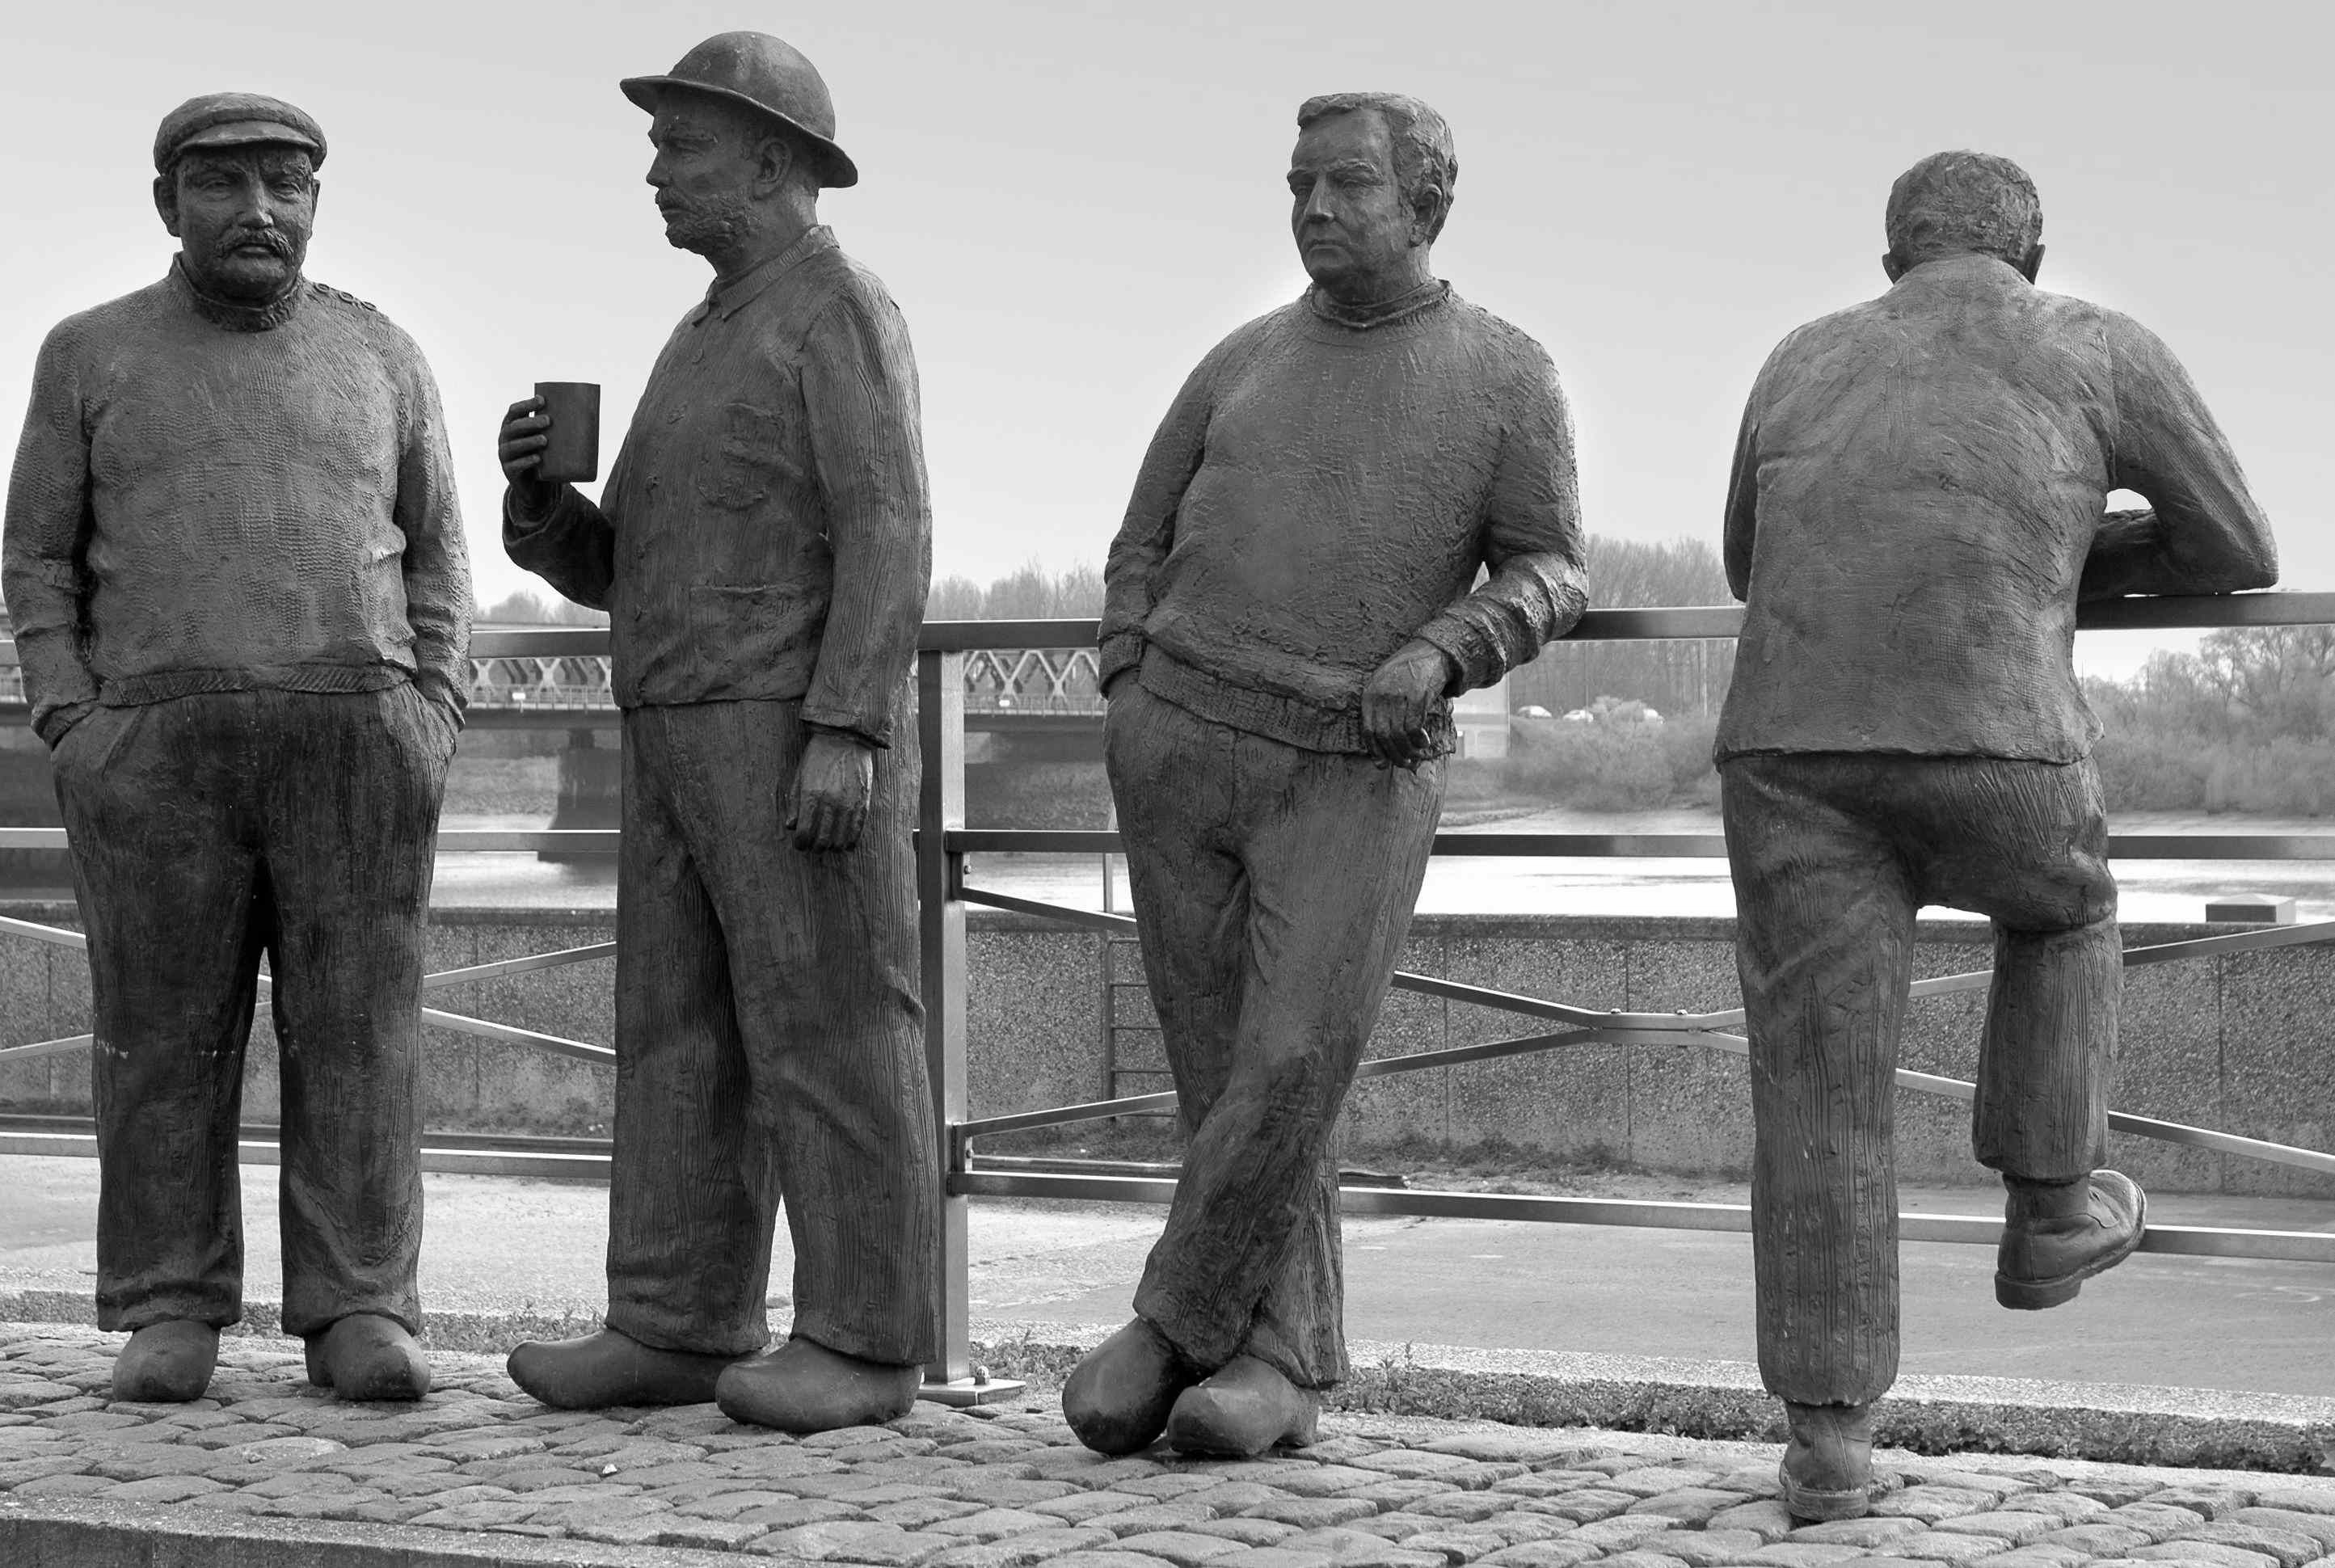 "Picture of statues of four working class men leaning on a fence"